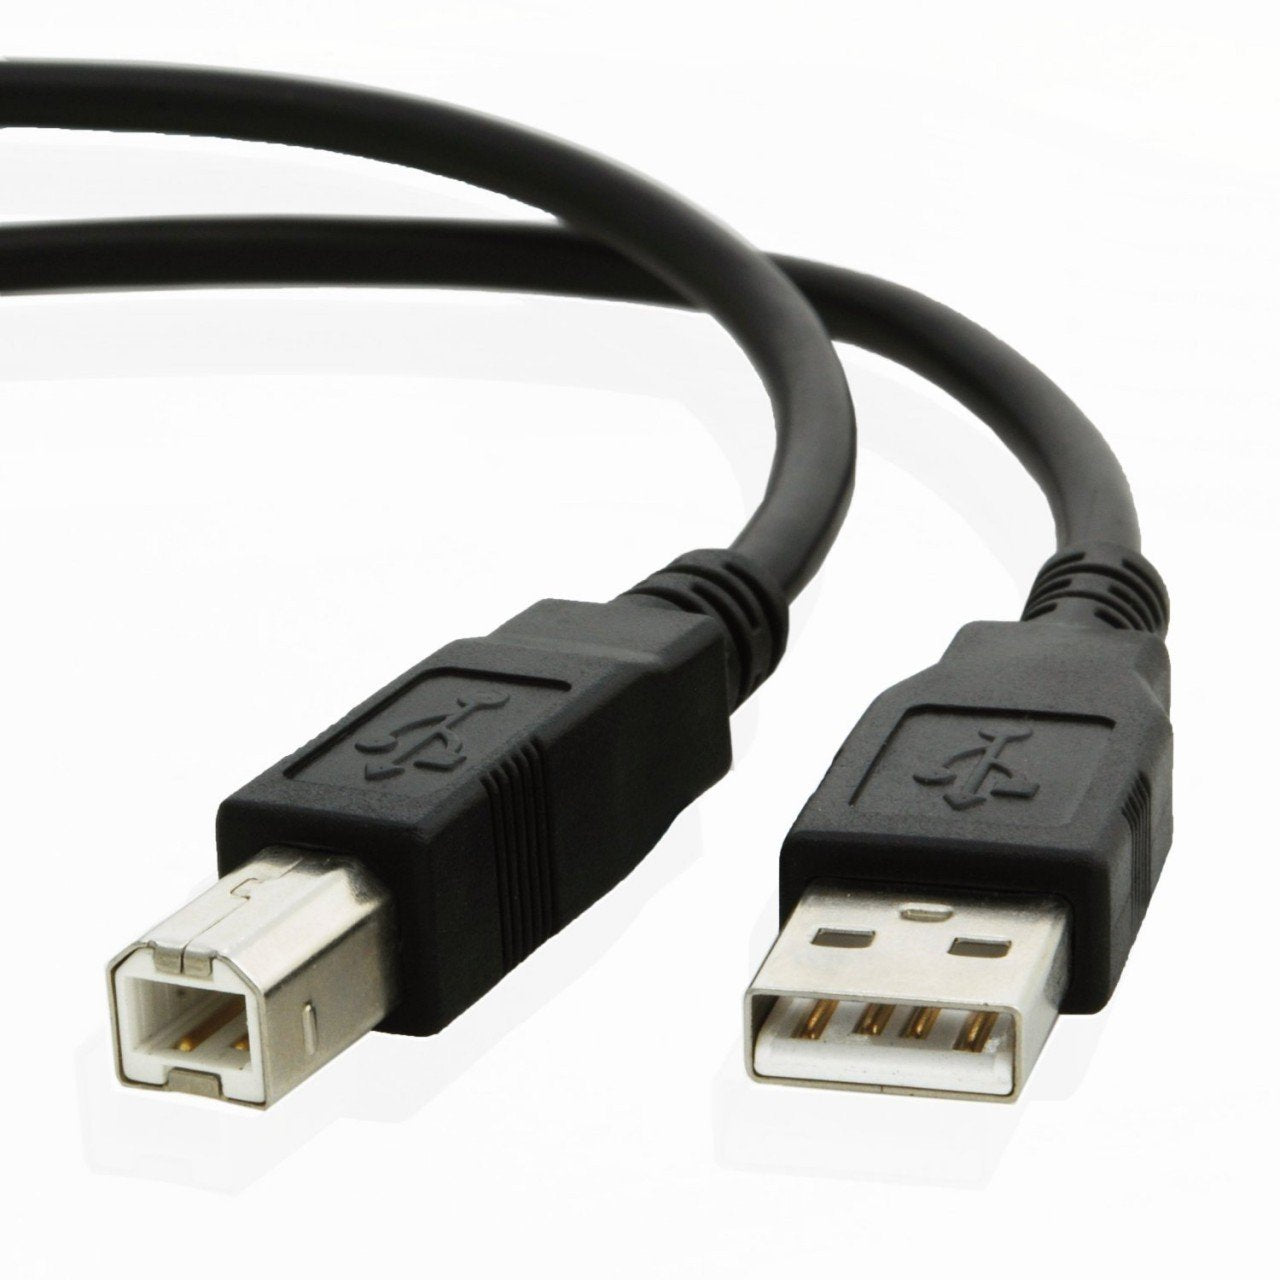 USB cable for Canon PIXMA MG2922